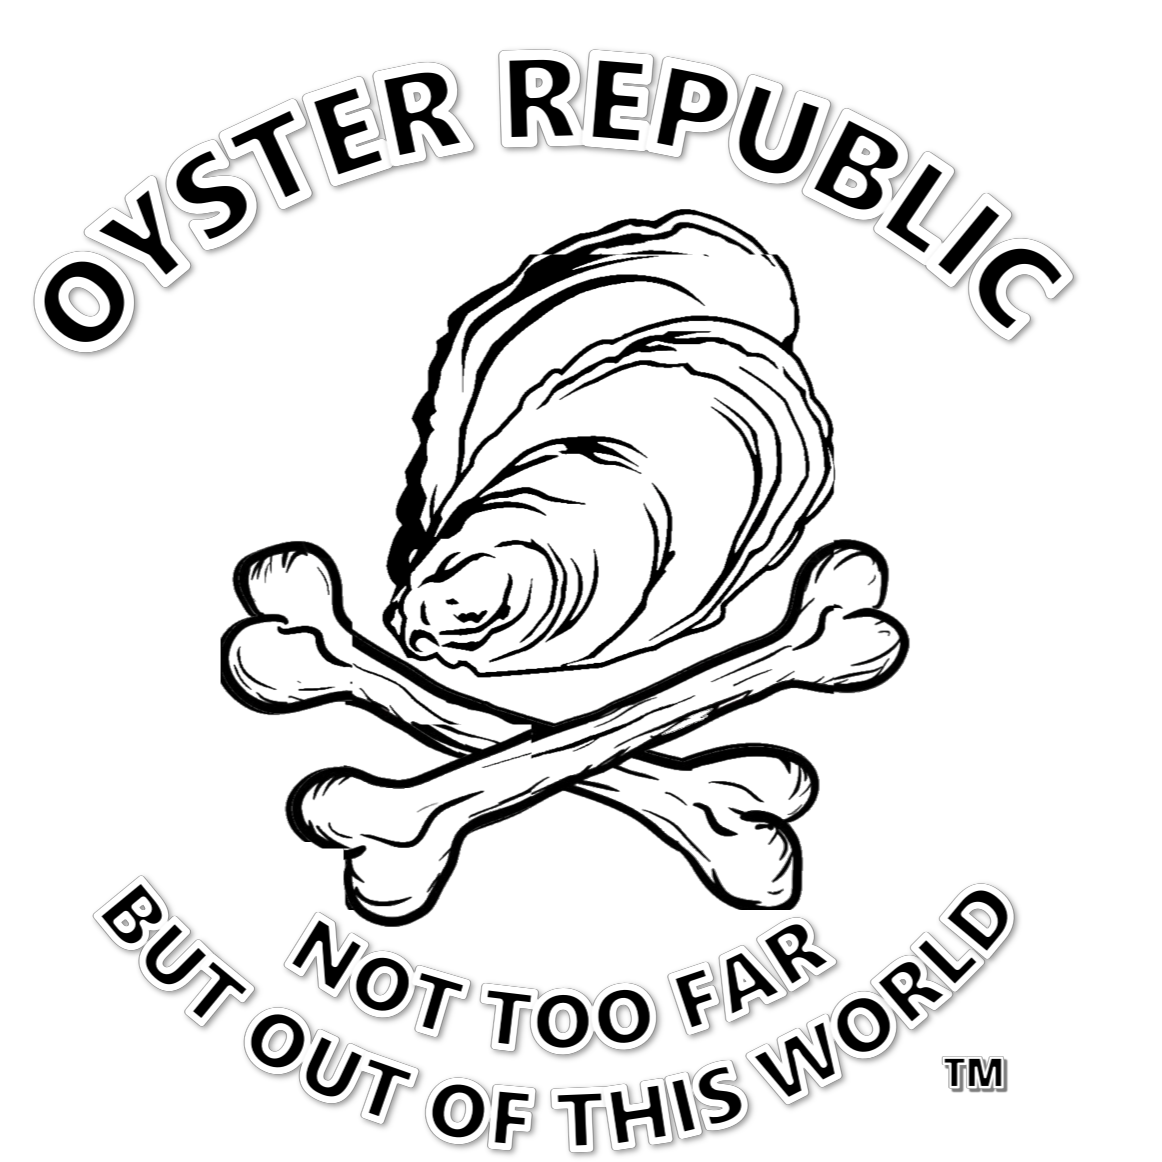 Oyster Republic T-Shirts, Apparel, and Accessories.